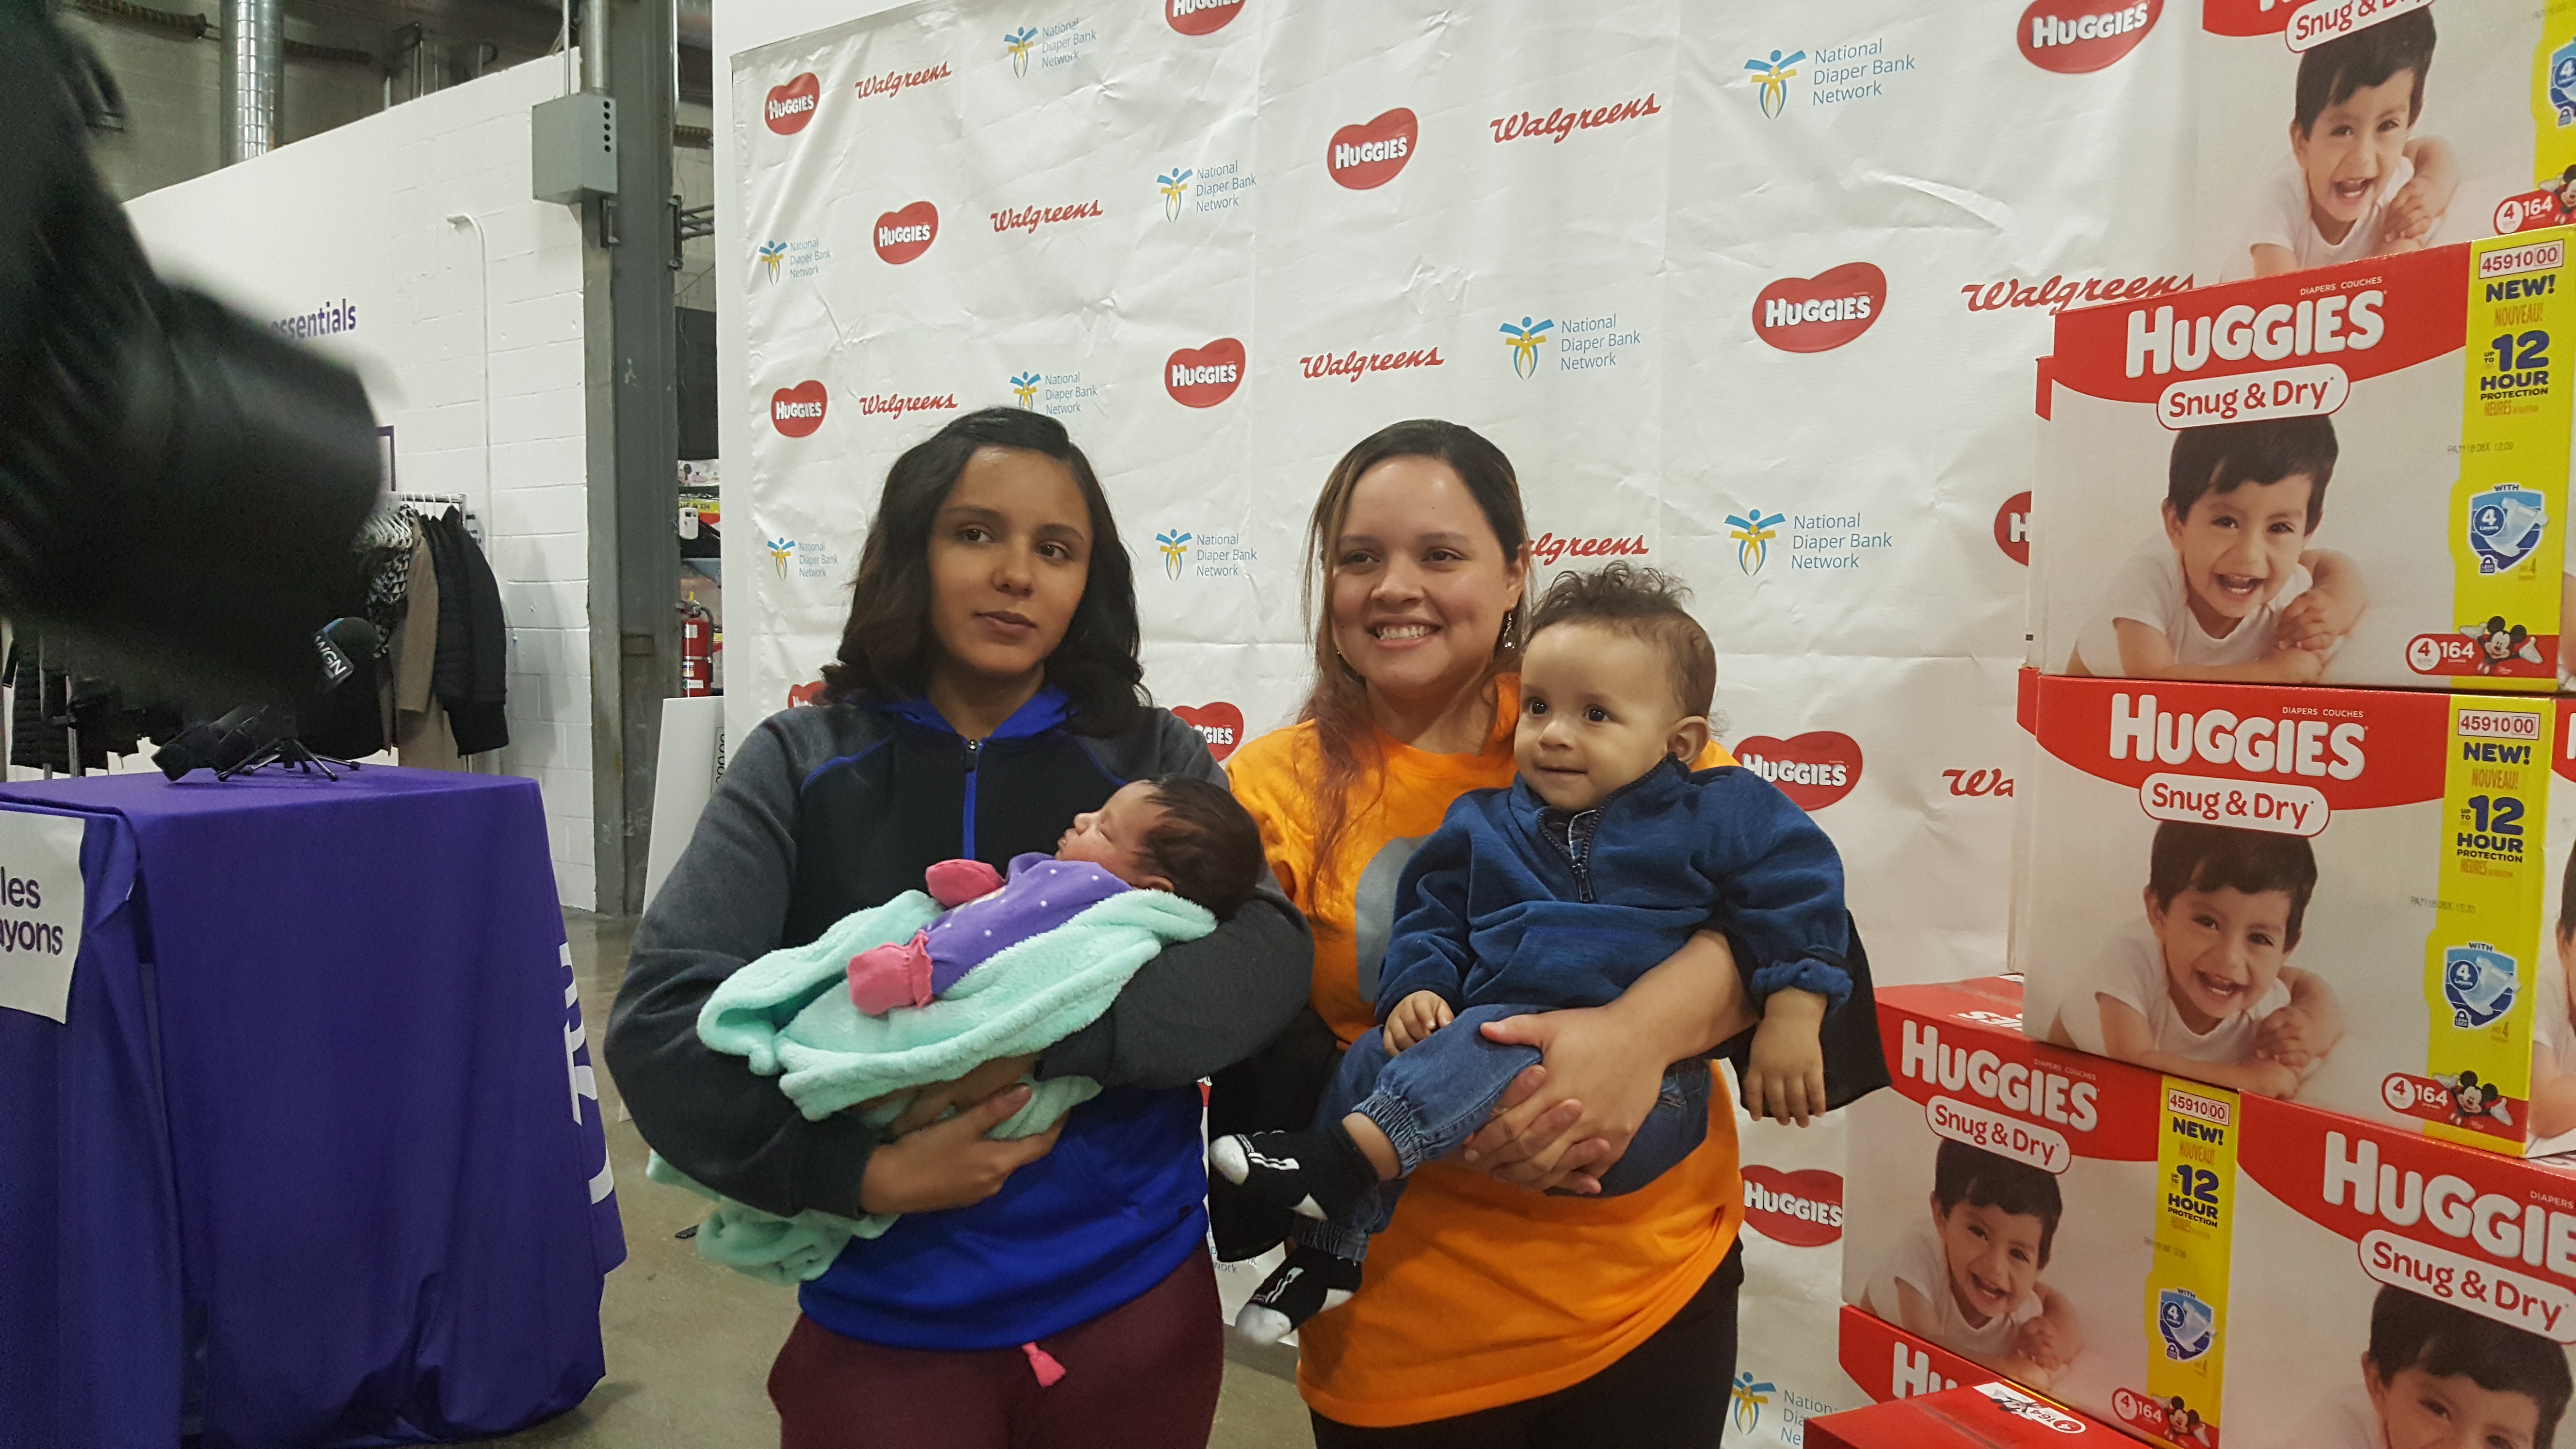 Oh, baby! Walgreens and Huggies partner to donate funds & diapers